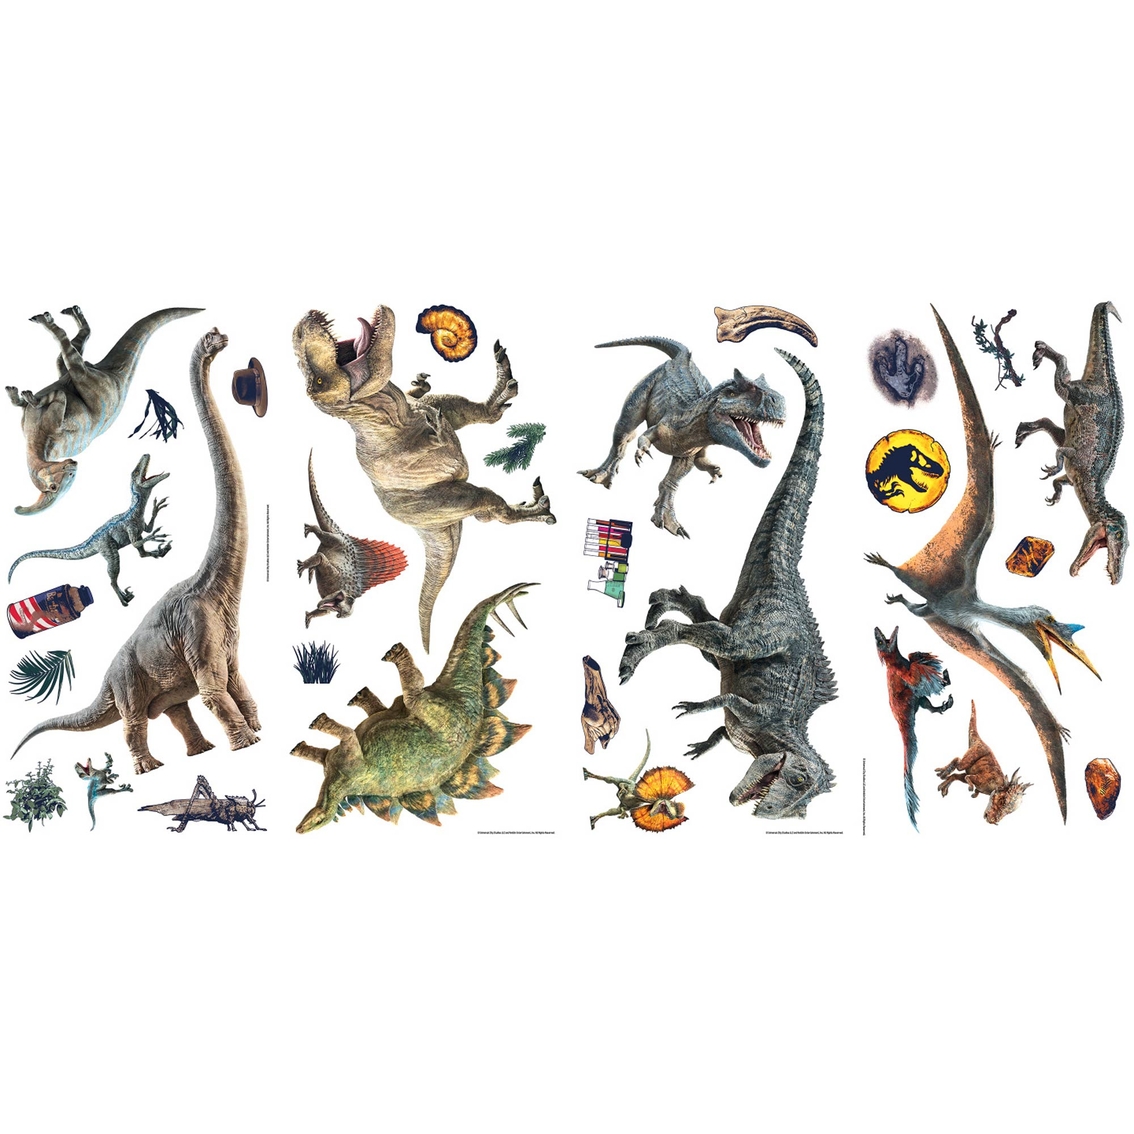 RoomMates Jurassic World: Dominion Peel and Stick Wall Decals - Image 2 of 6